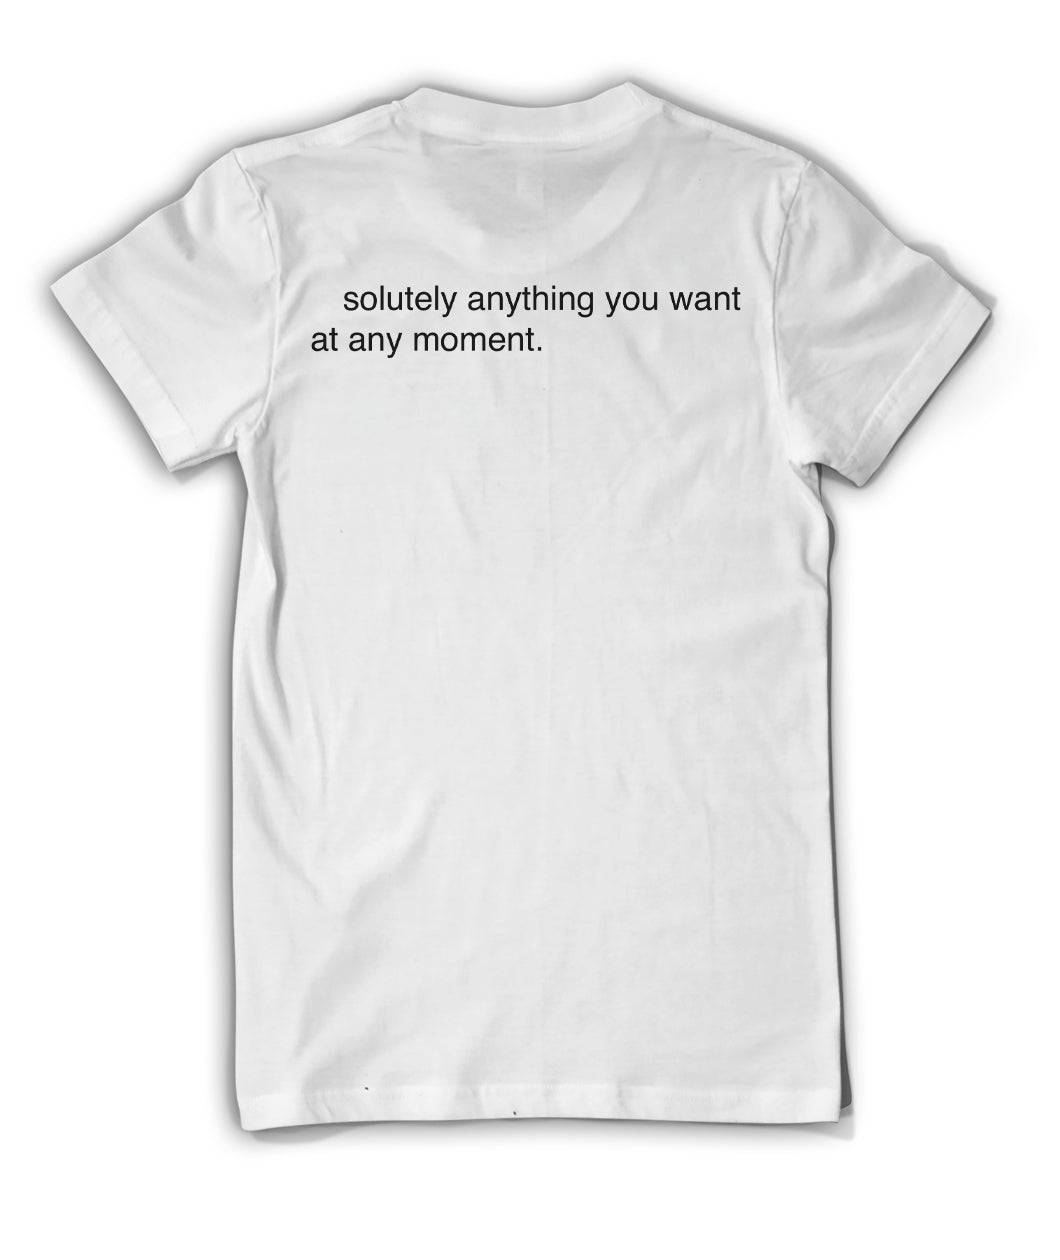 The back of a white t-shirt reads "solutely anything you want at any moment." From Bill Wurtz. 